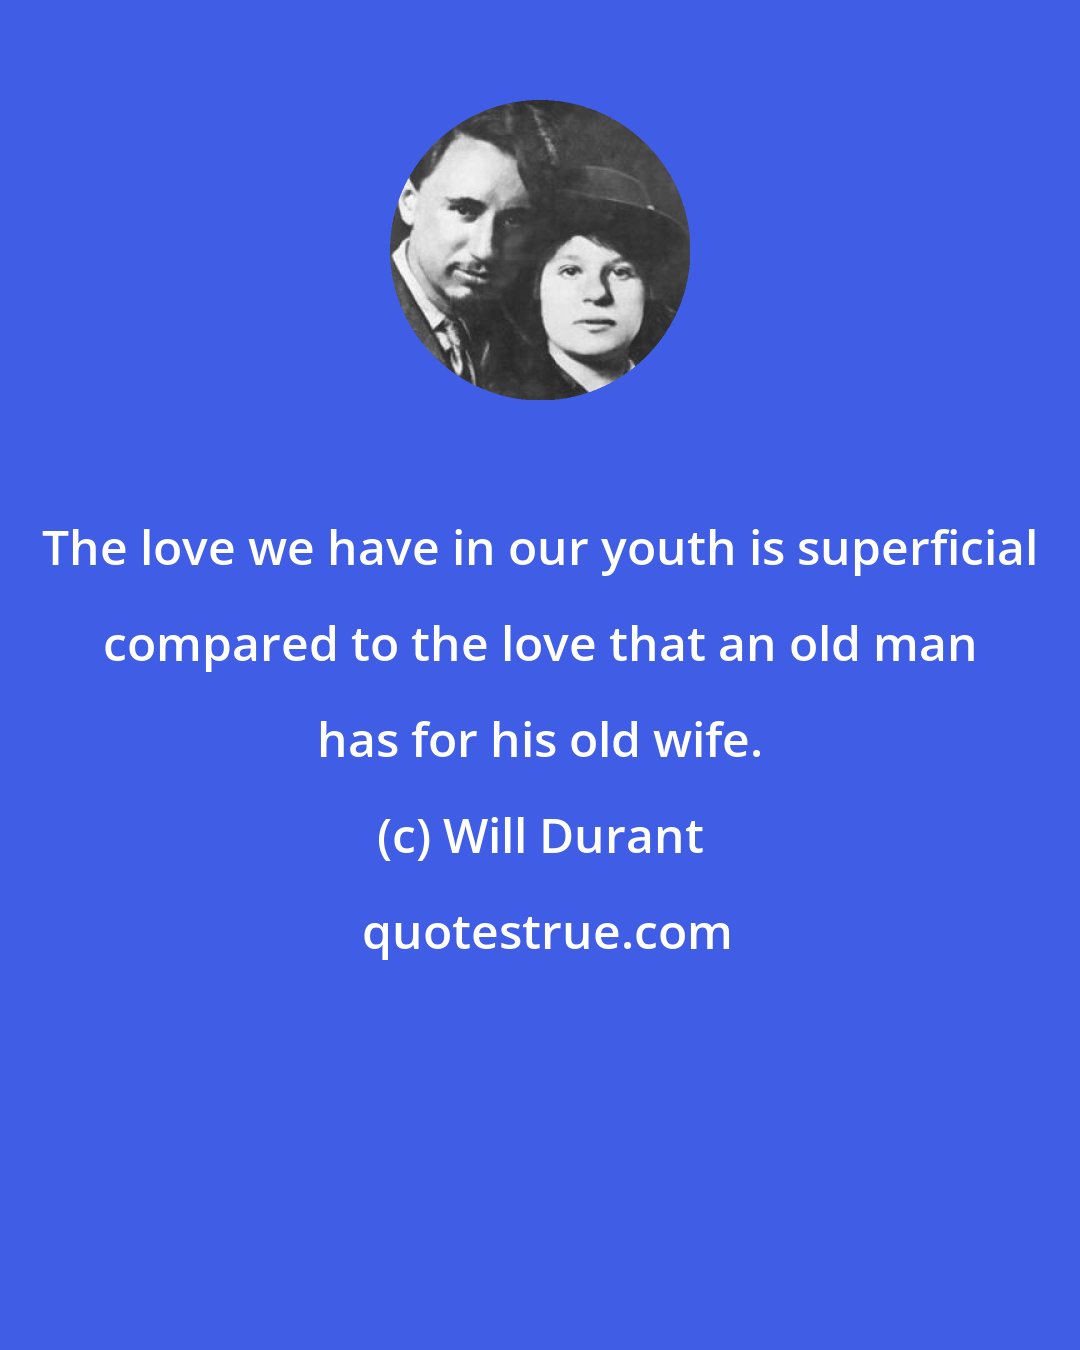 Will Durant: The love we have in our youth is superficial compared to the love that an old man has for his old wife.